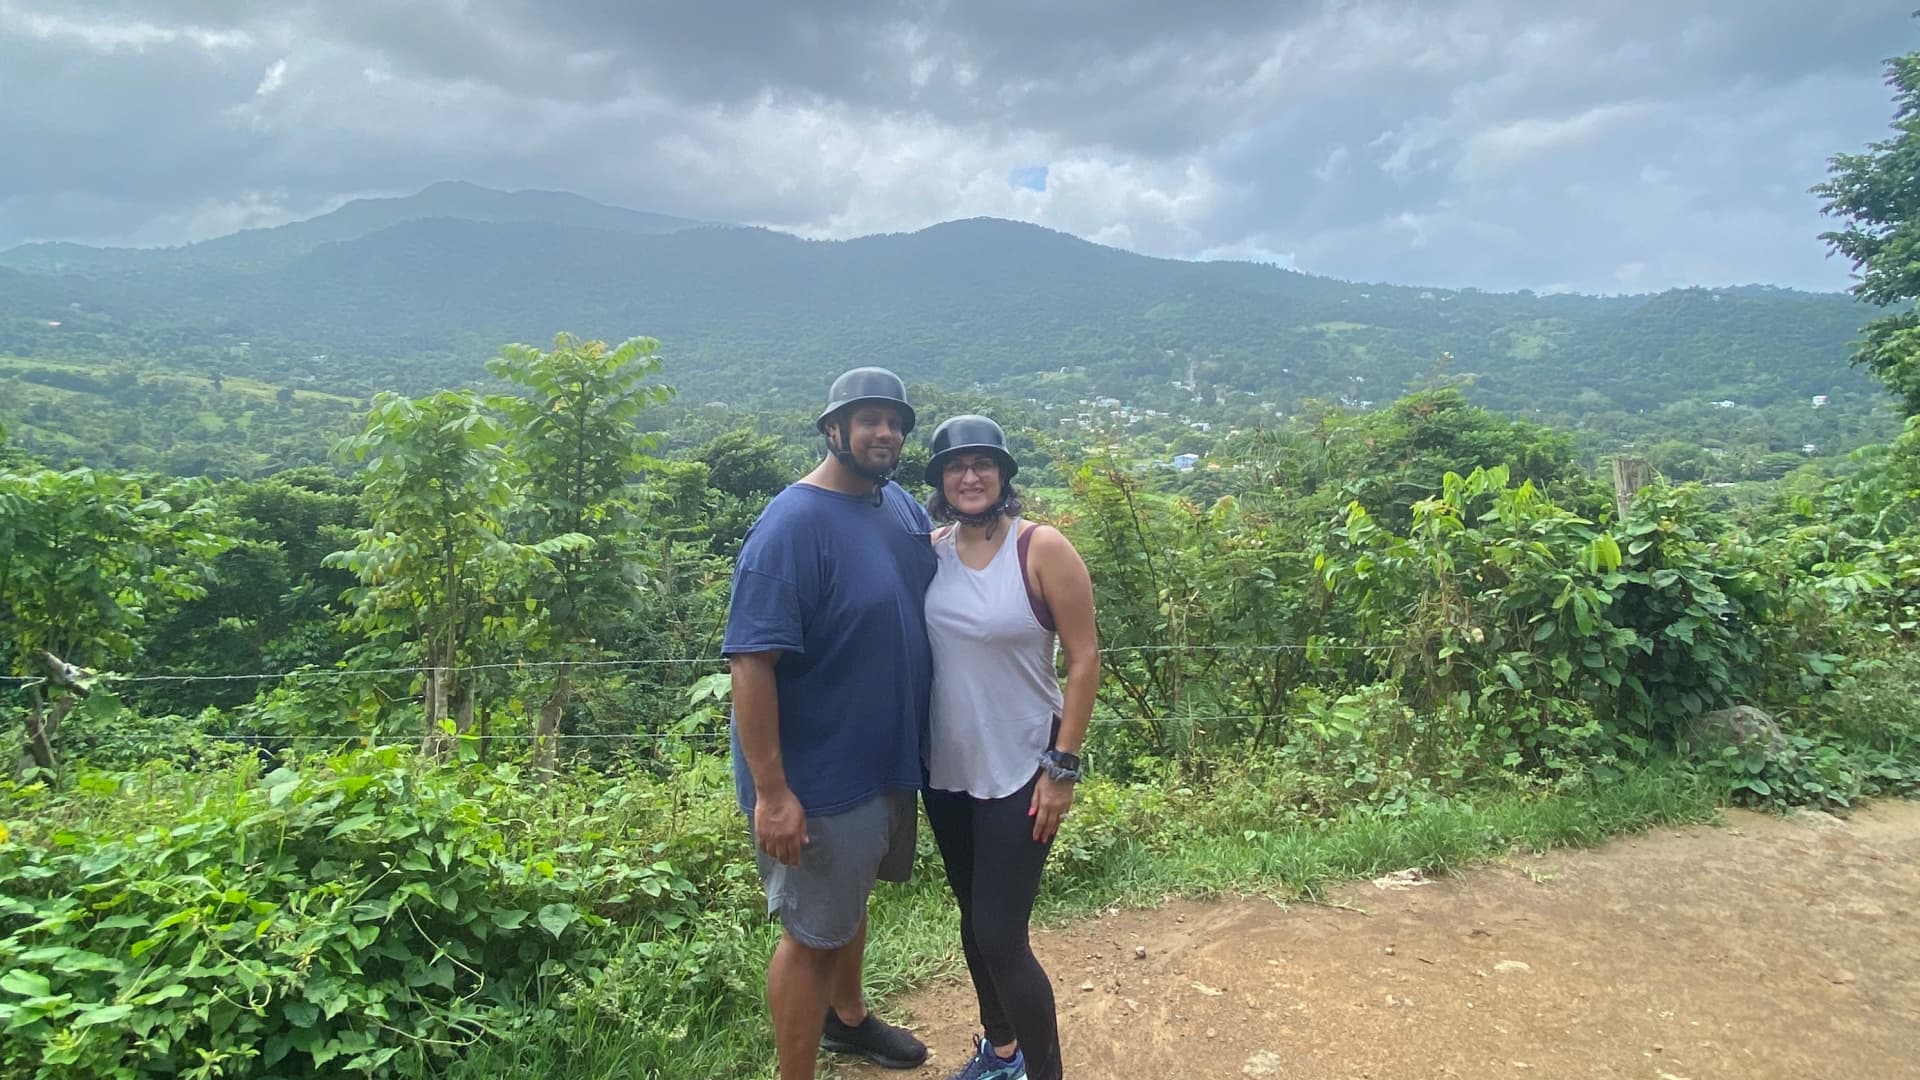 Kimanzi and his wife's first stop as full-time travelers was Puerto Rico, where they connected with his wife's heritage.